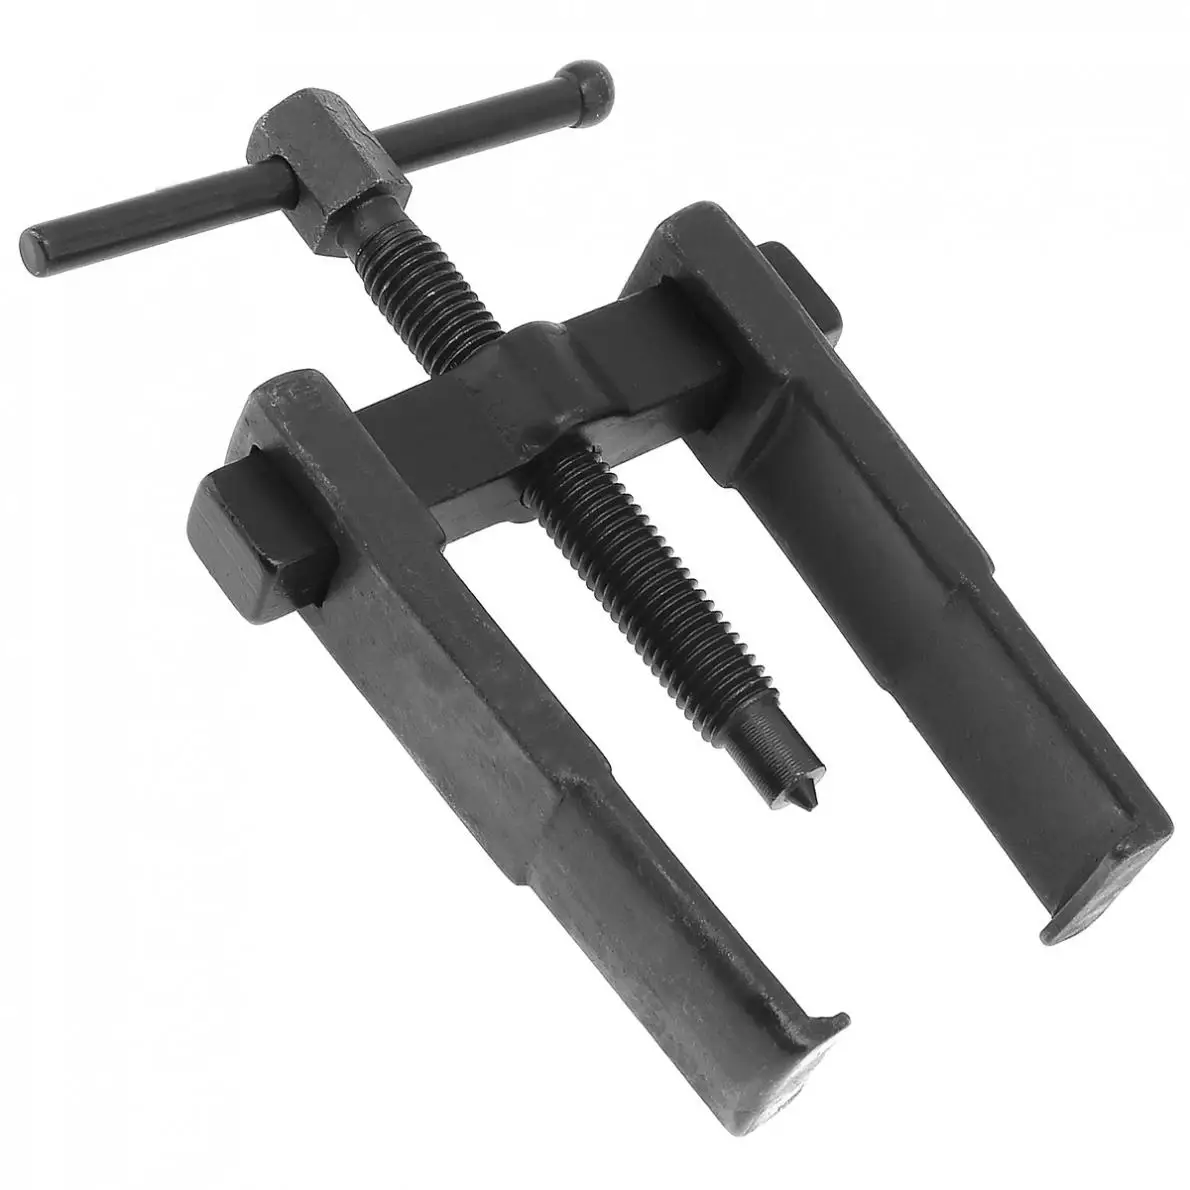 Two-claw Bearing Rama Puller Separate Lifting Device Extractor for Auto Mechanic 